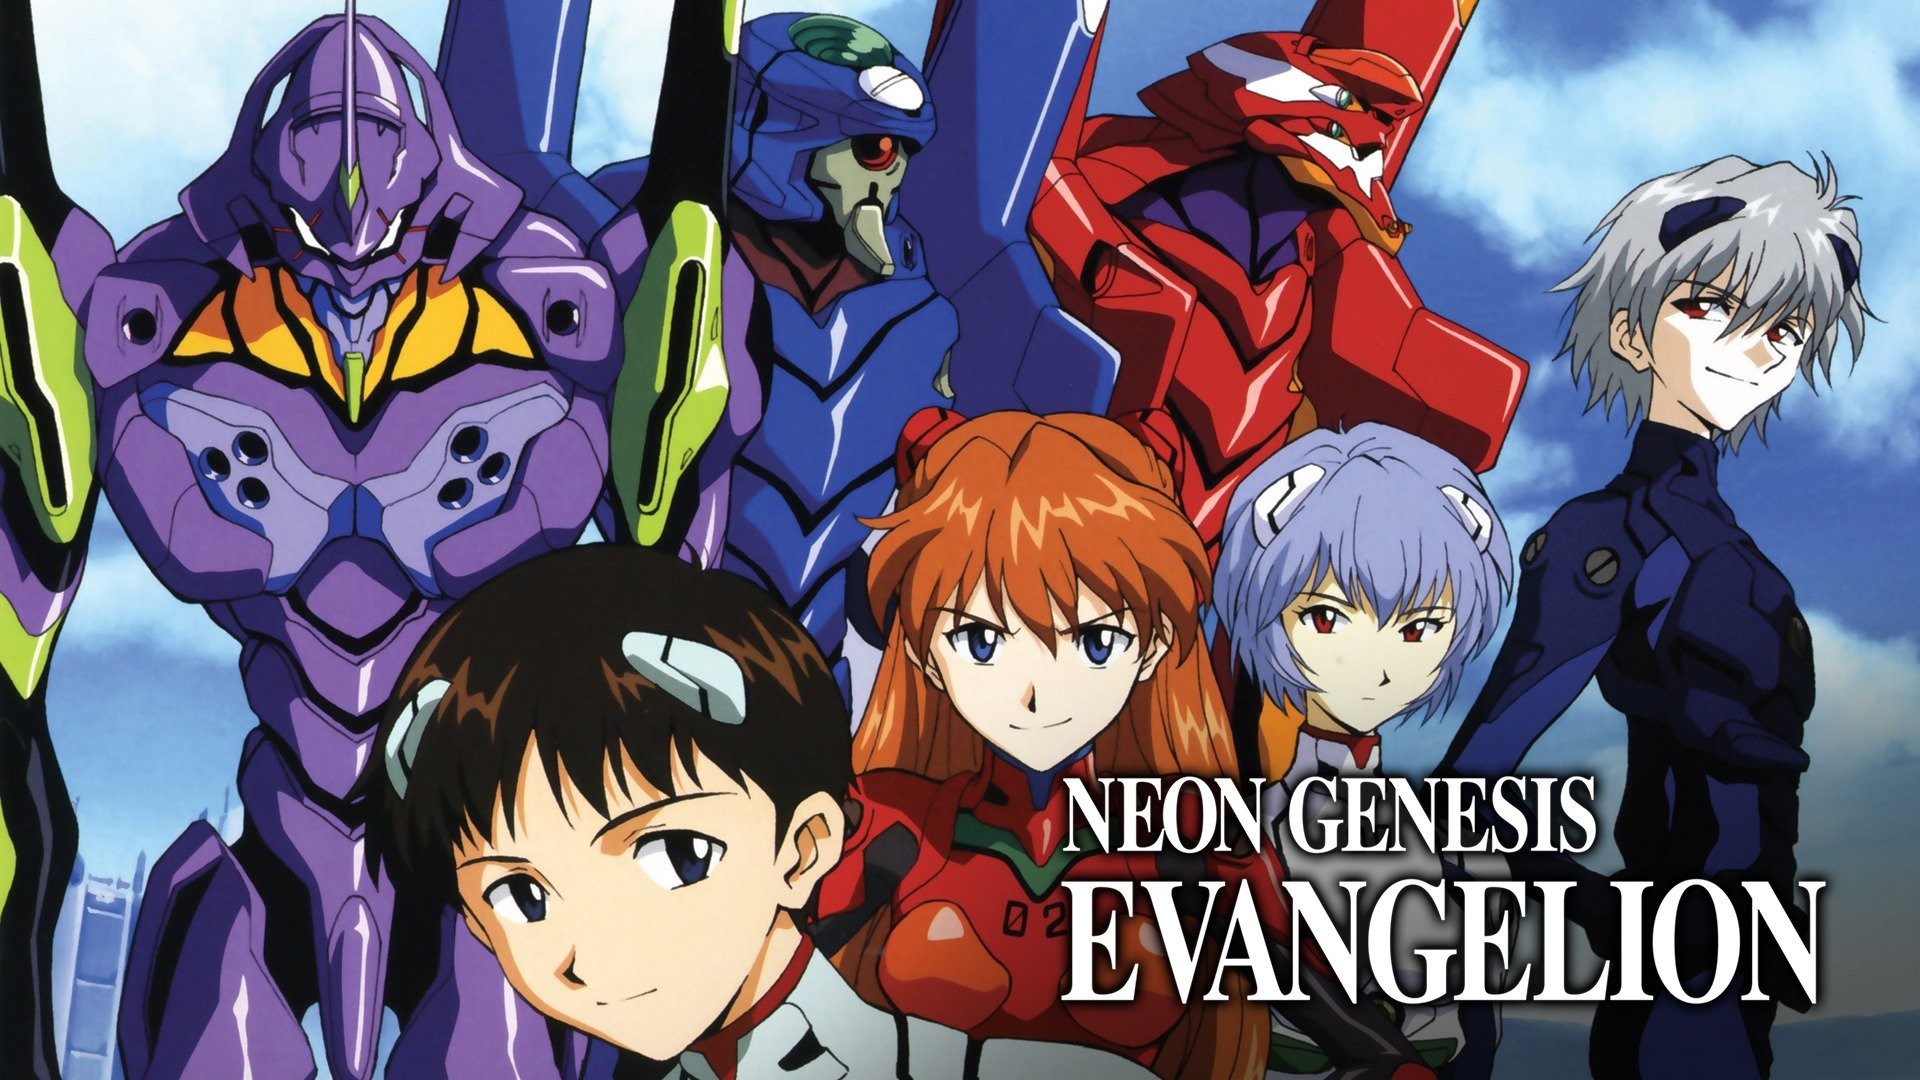 Collaboration Event with Popular Anime Evangelion Begins in Fantasy RPG  Valkyrie Connect! Players Can Receive “Catalyst Shinji” for Free! |  株式会社エイチーム（Ateam）